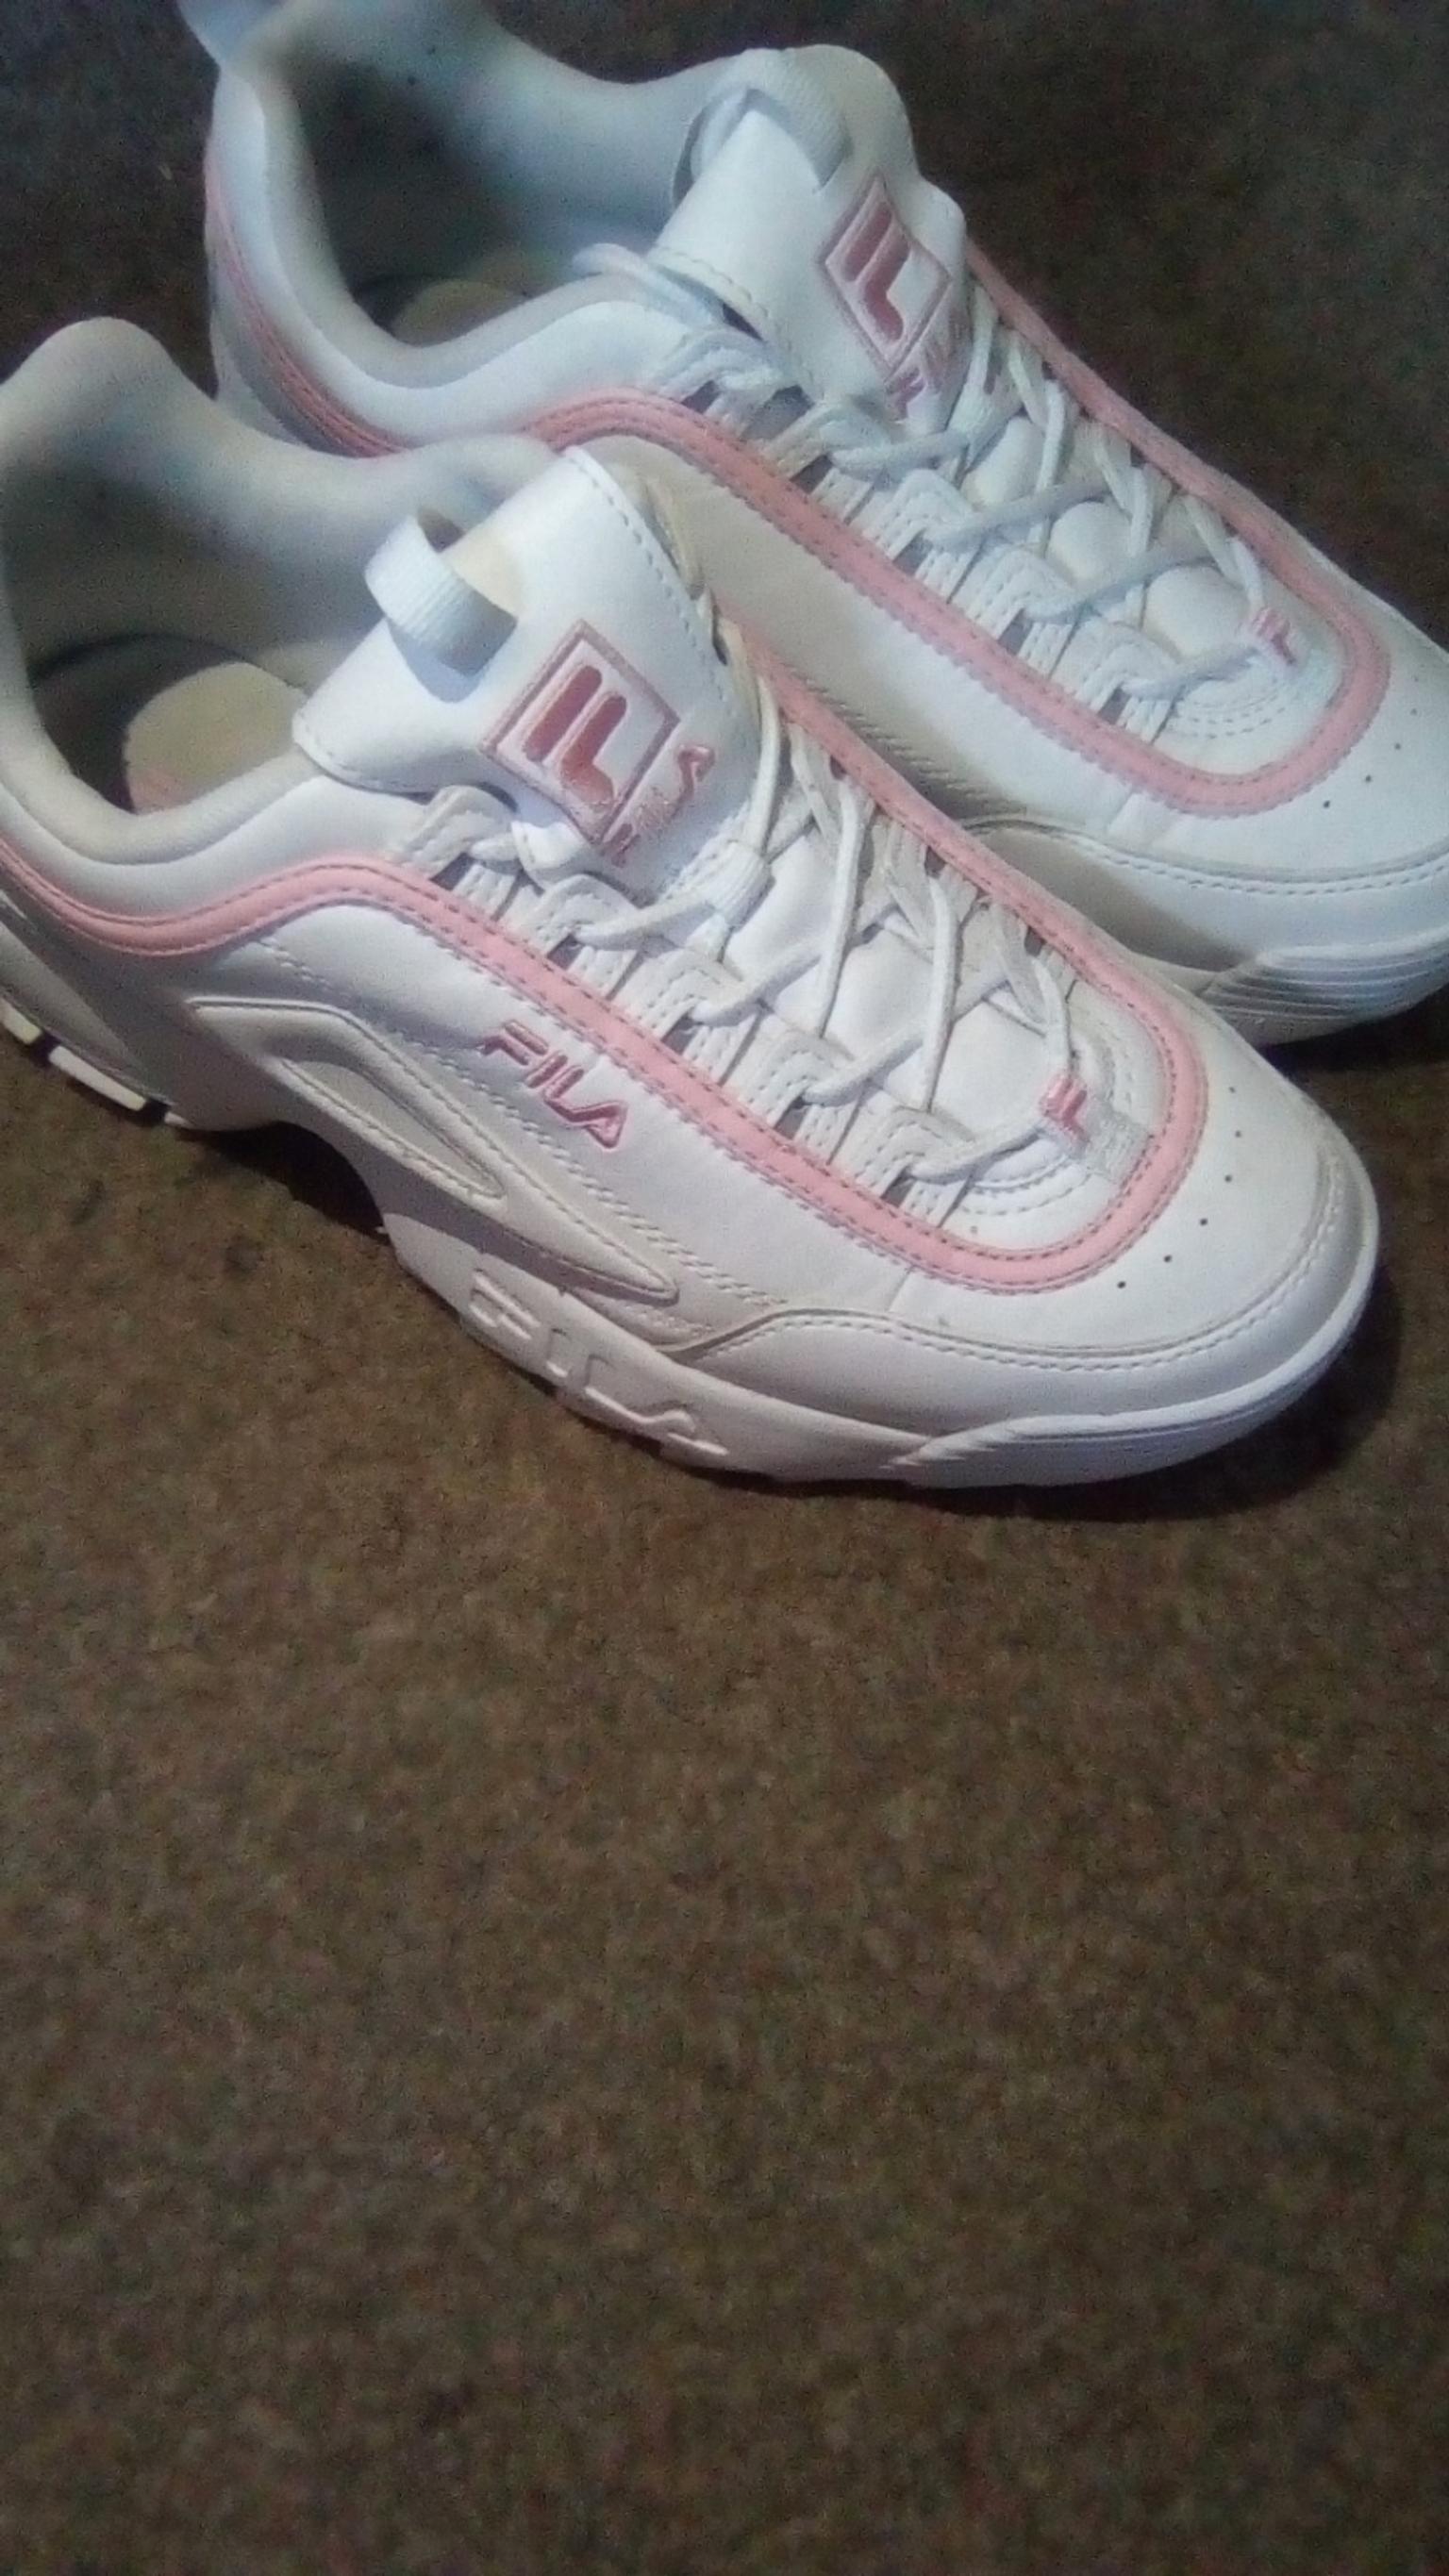 jd sports white womens trainers